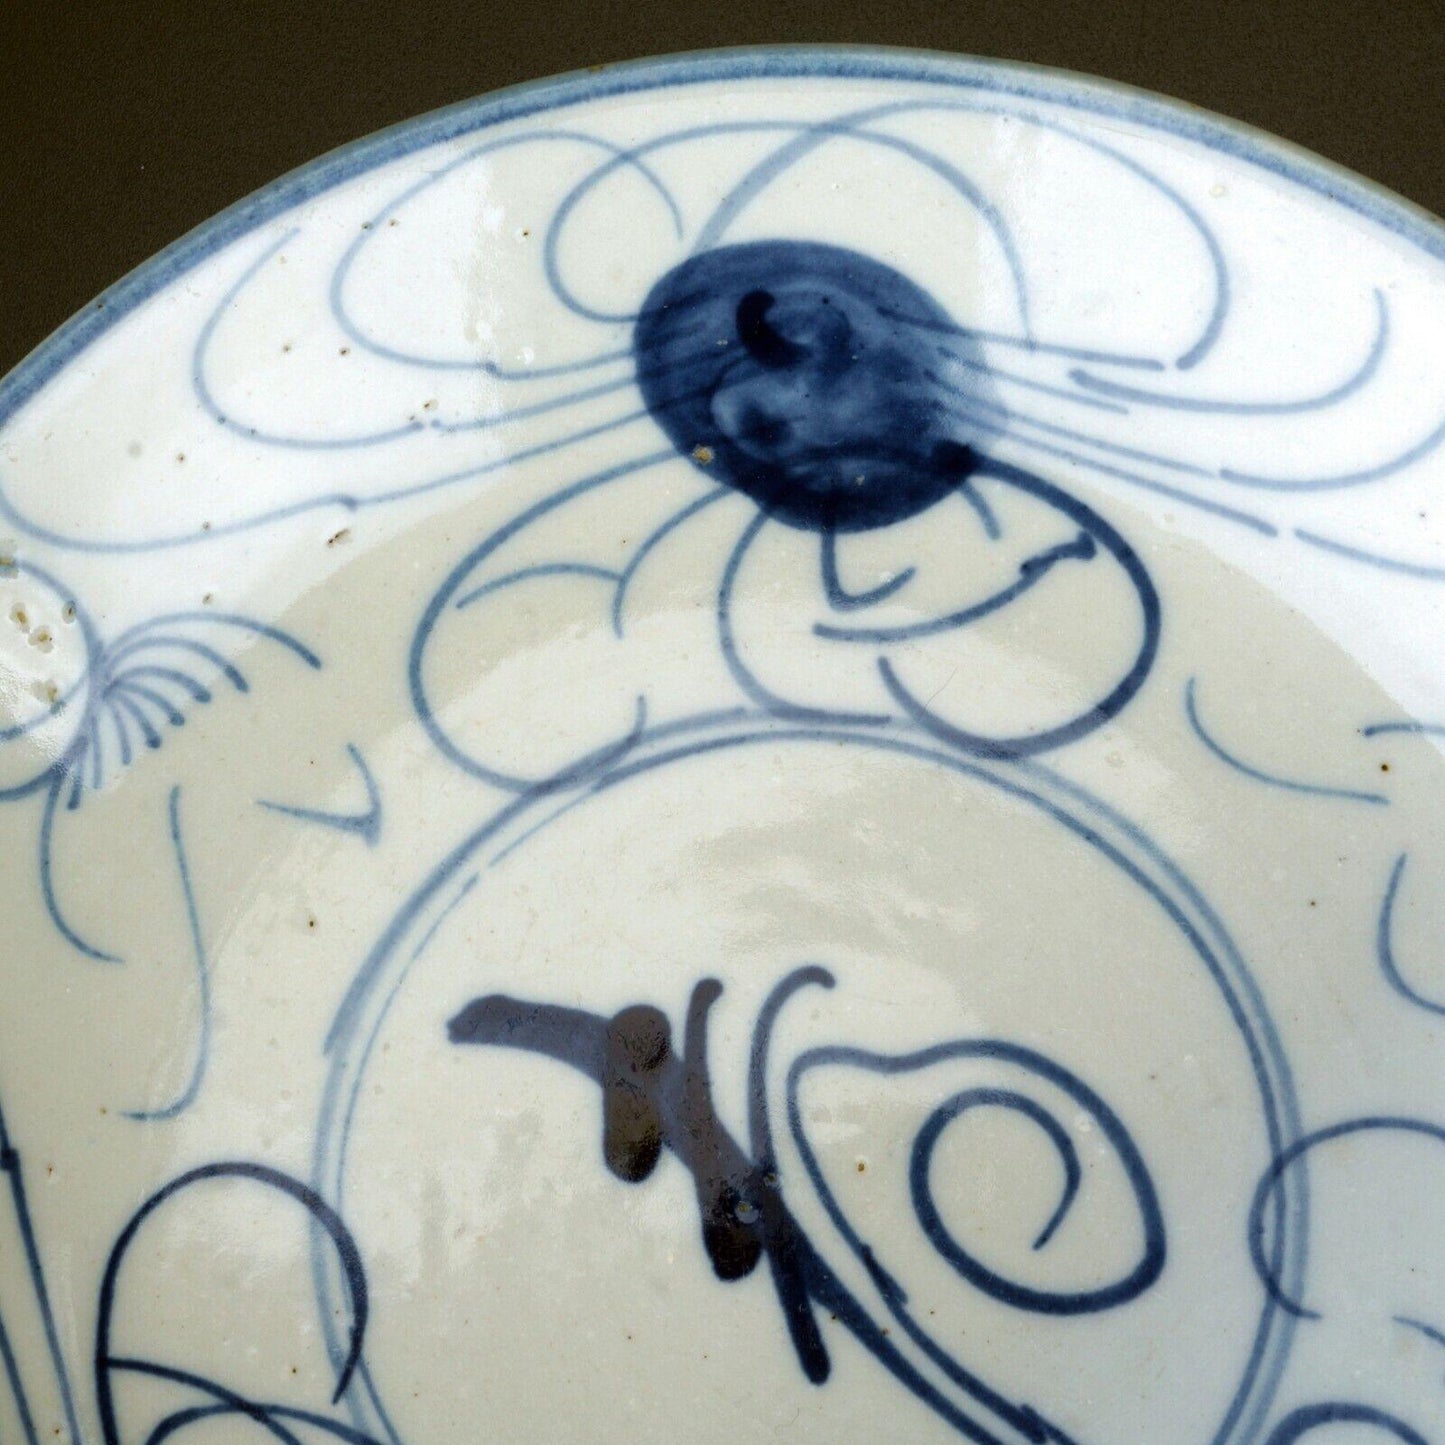 Chinese Late 18th/Early 19th C Provincial Ware Plate with crab design - Bear and Raven Antiques